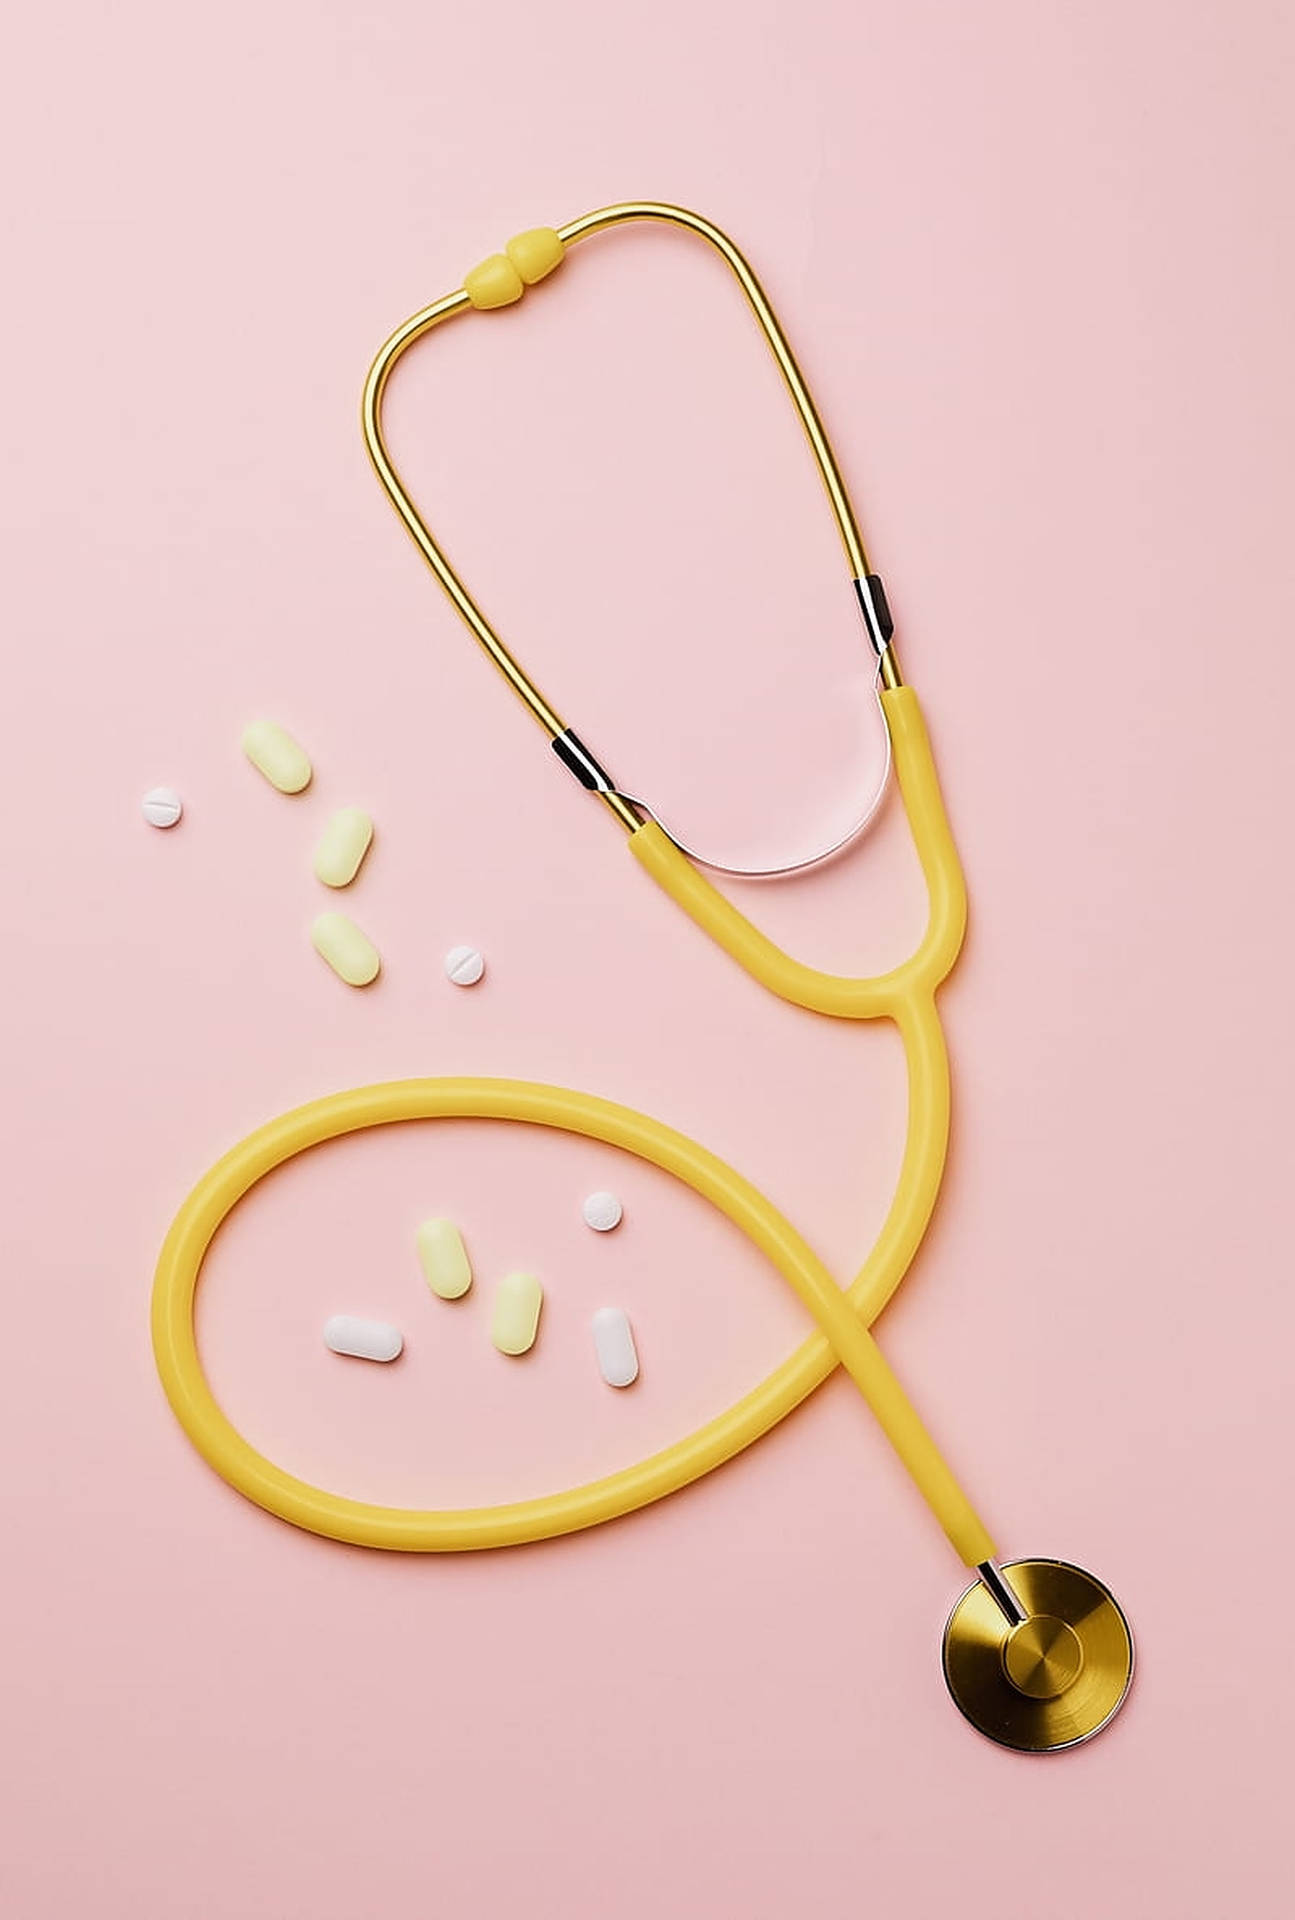 Experienced Doctor Wearing a Yellow Stethoscope Wallpaper